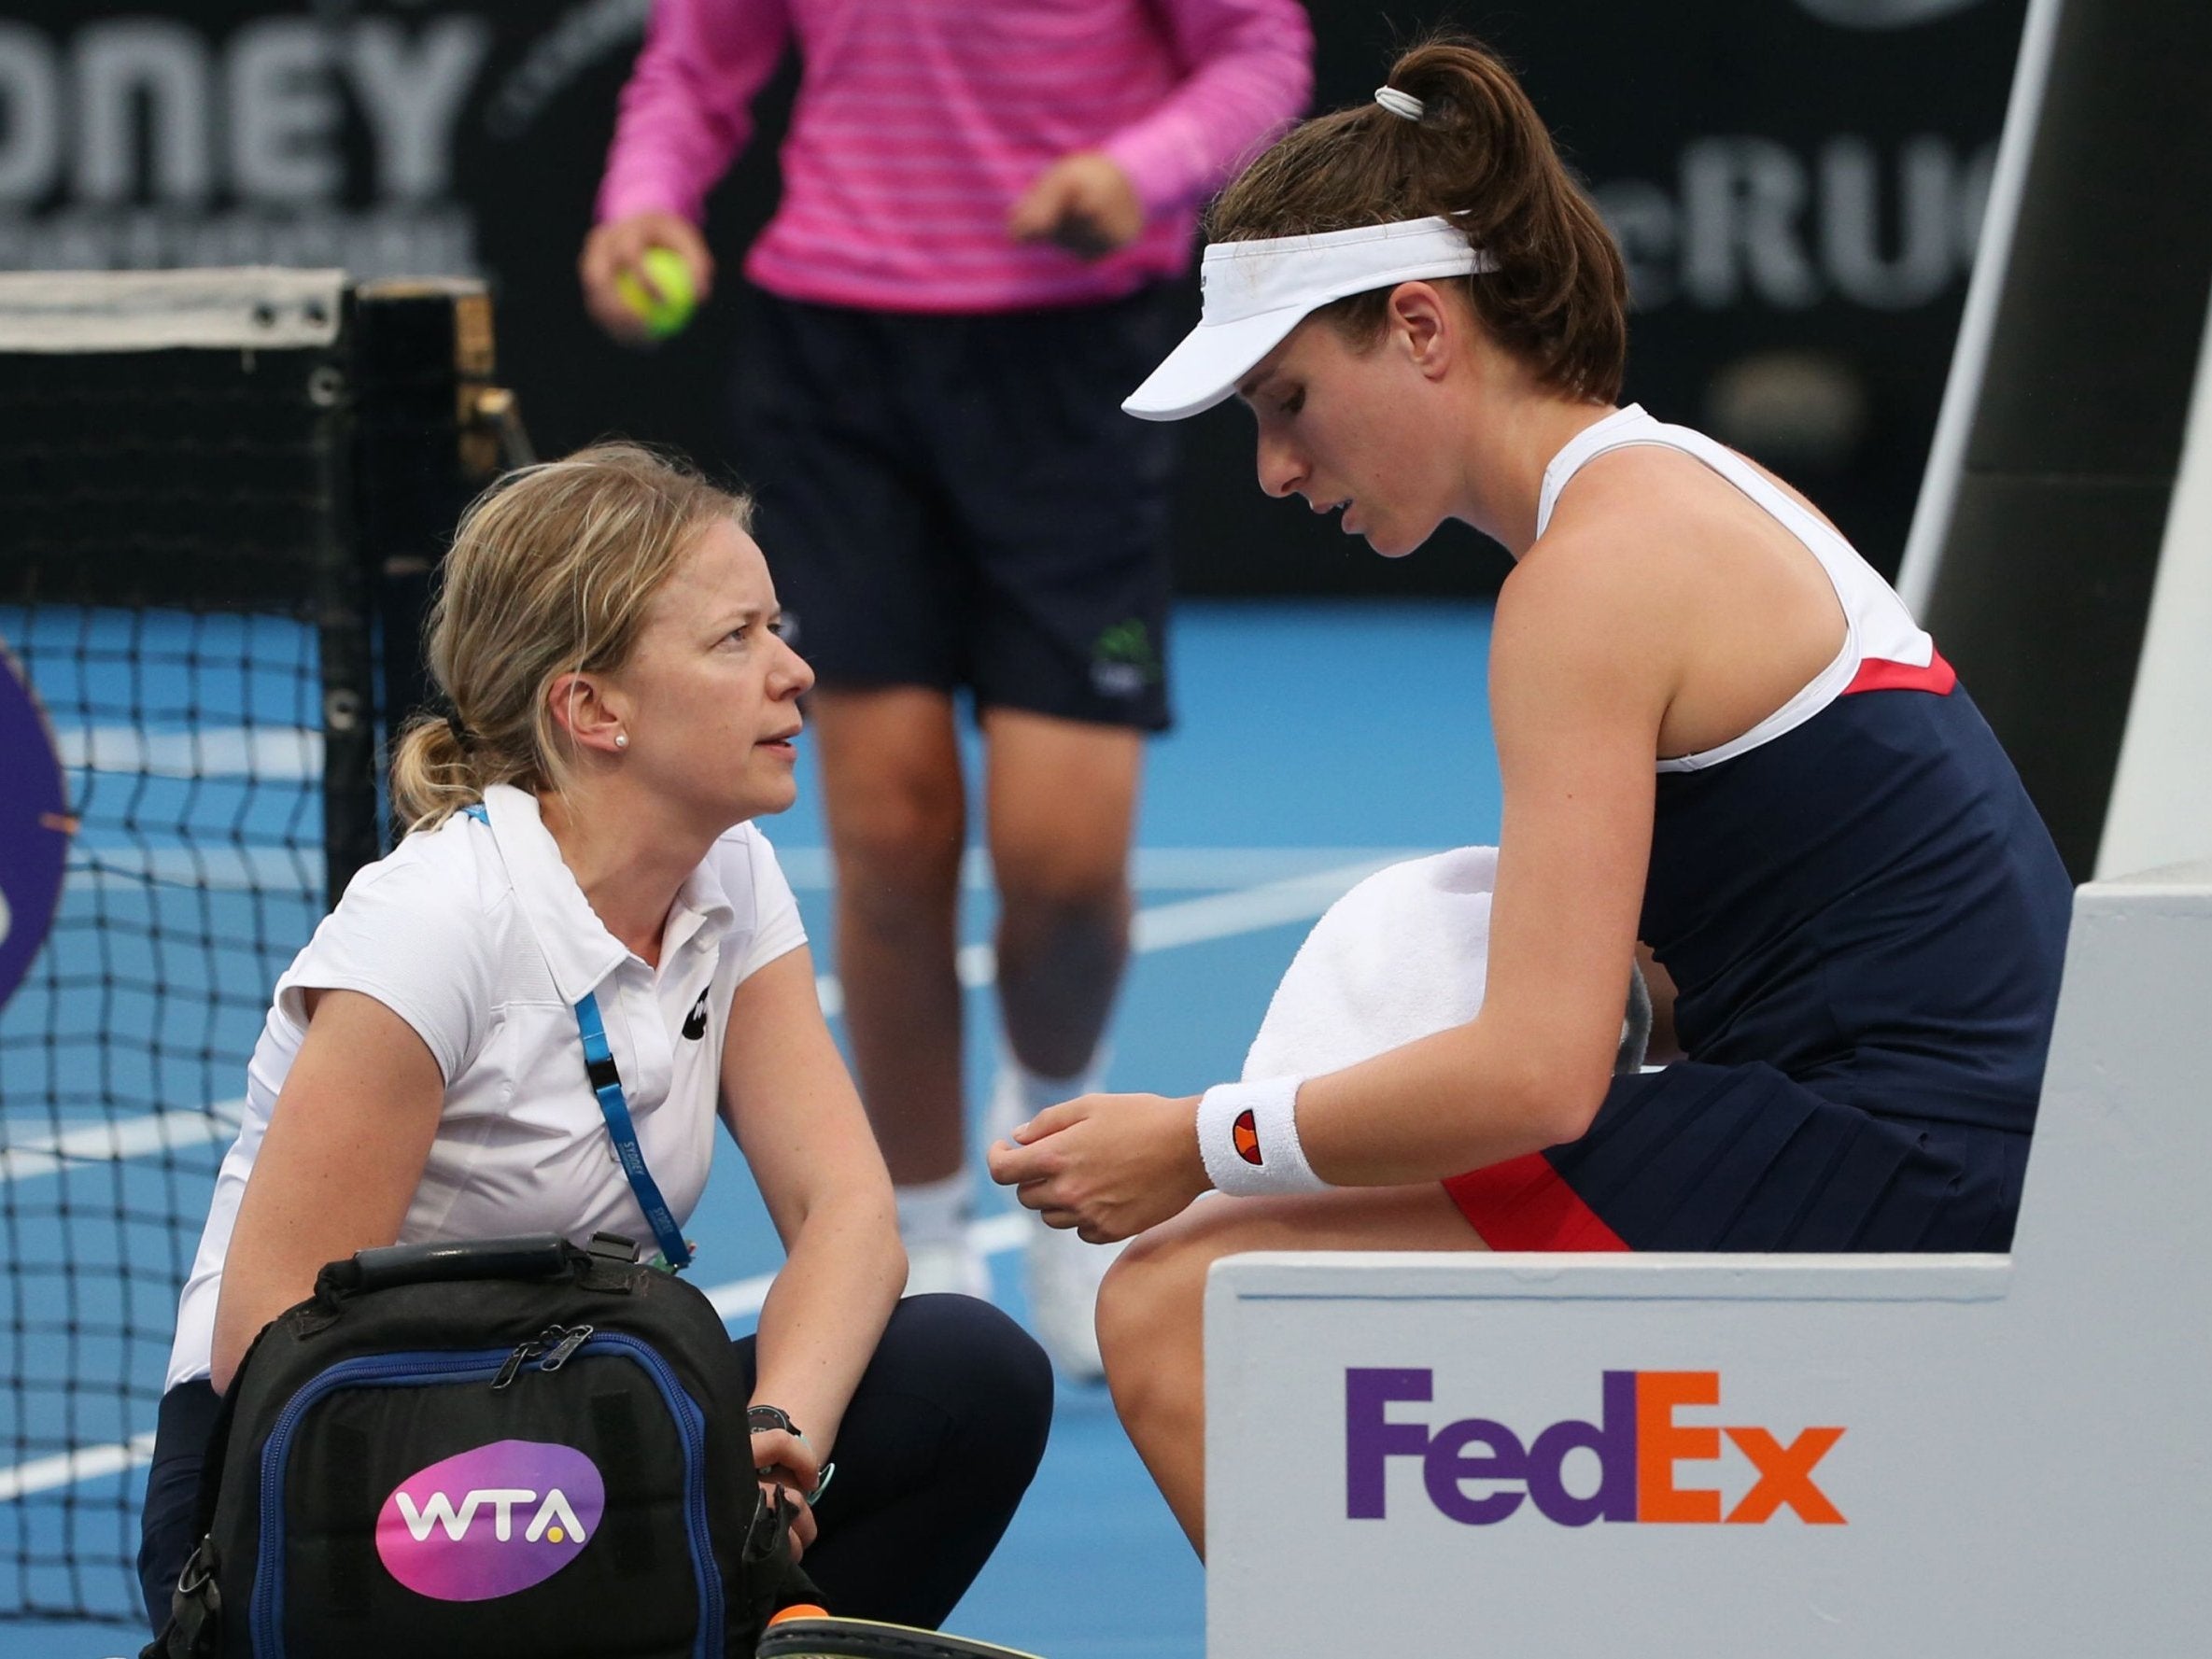 Johanna Konta retired with a neck injury during her match against Ekaterin Alexandrova